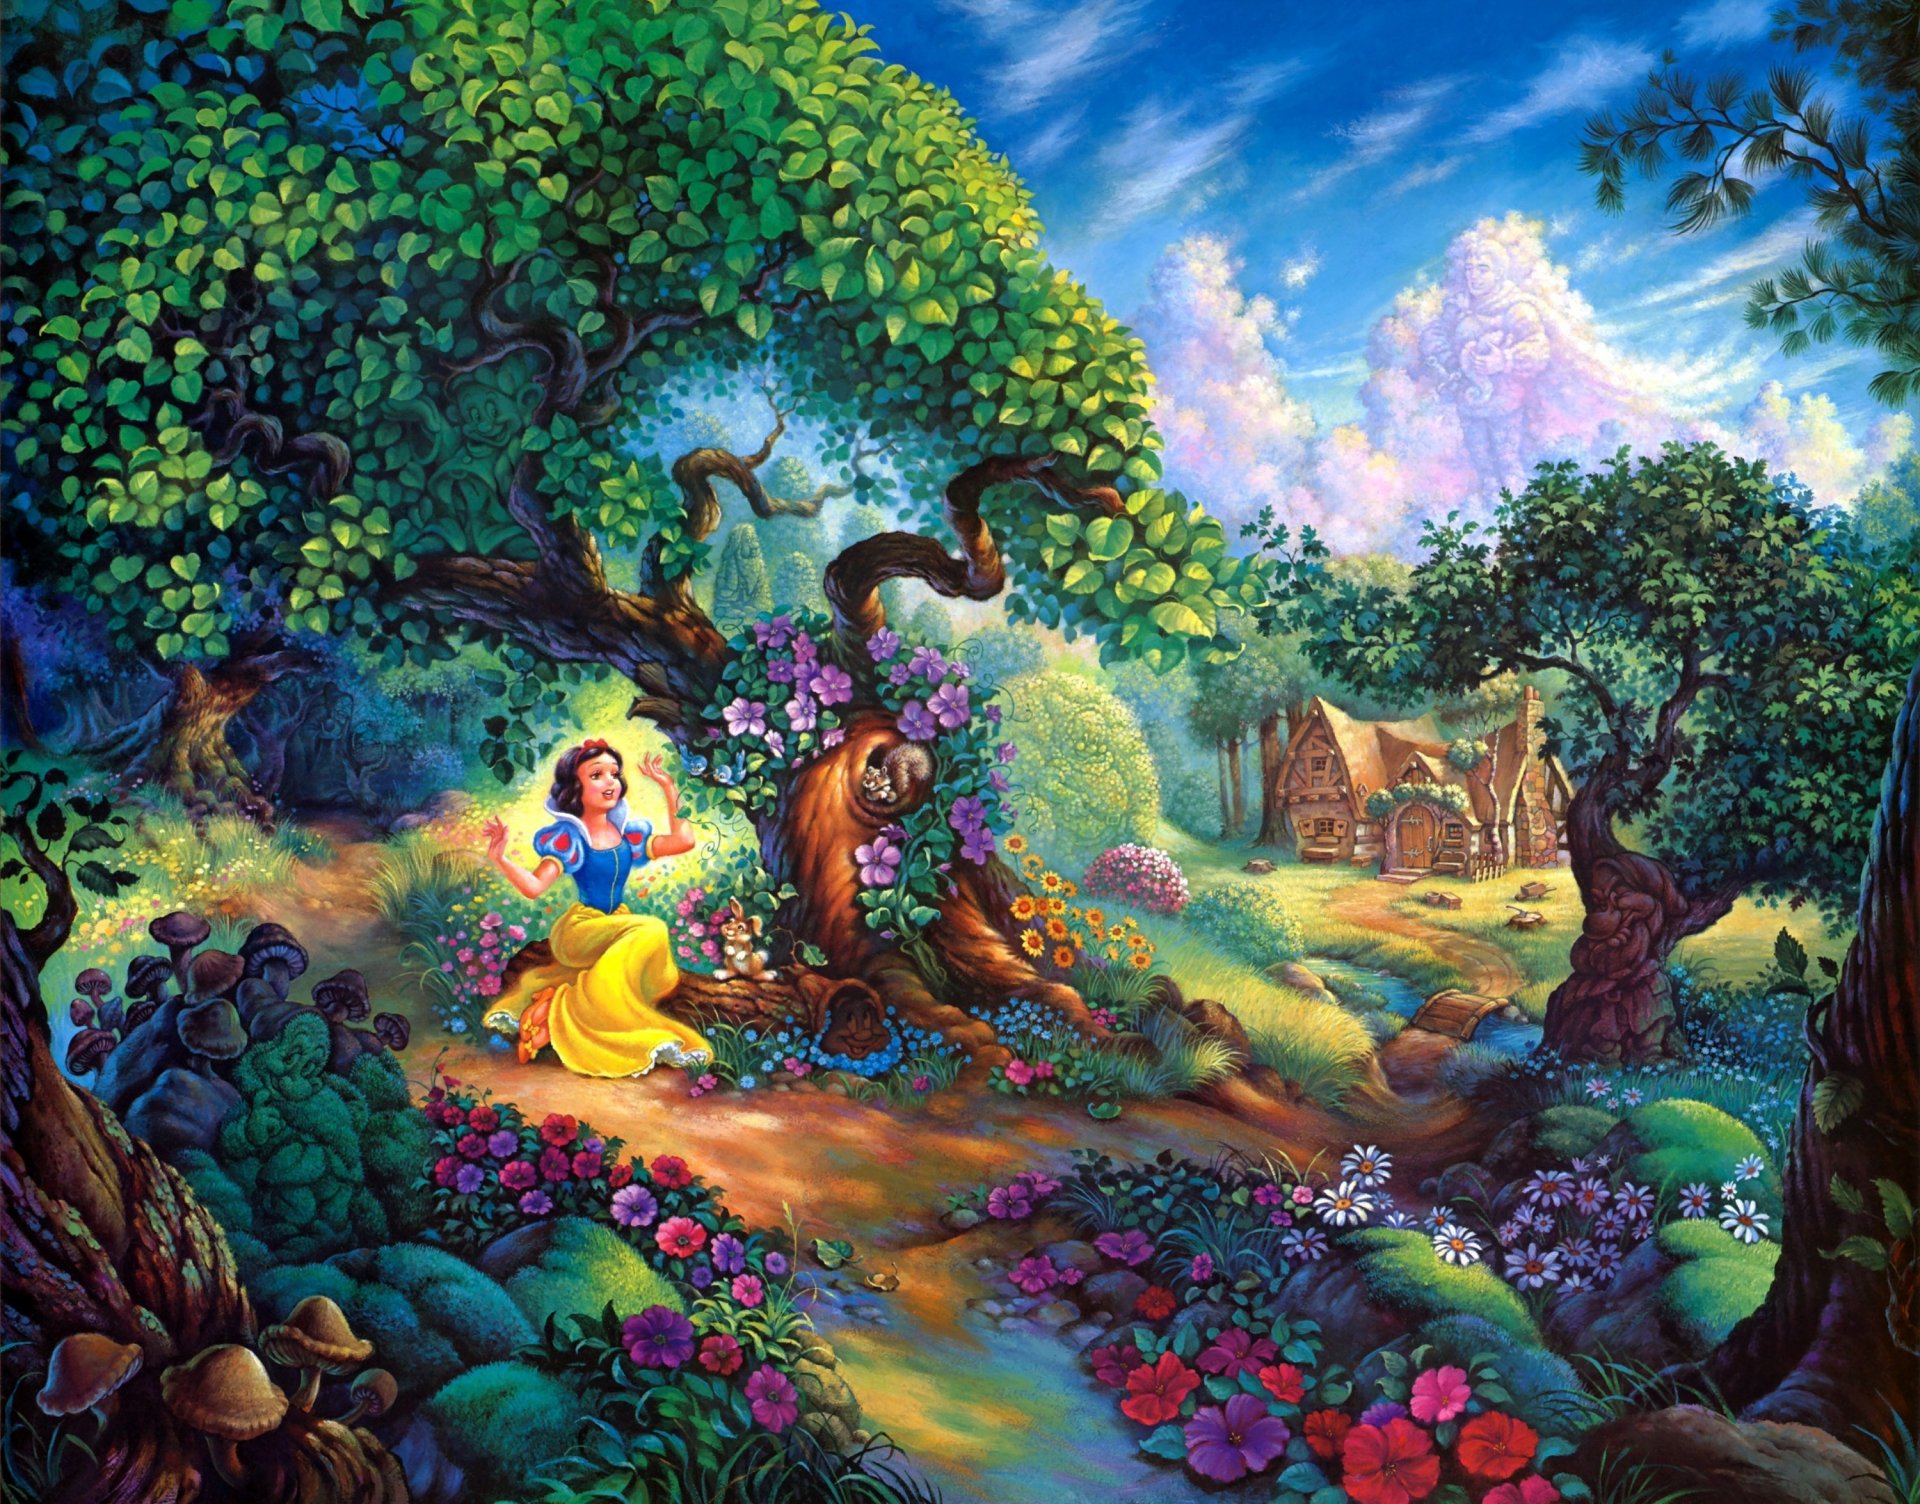 Snow White Wallpapers - Top Free Snow White Backgrounds - WallpaperAccess